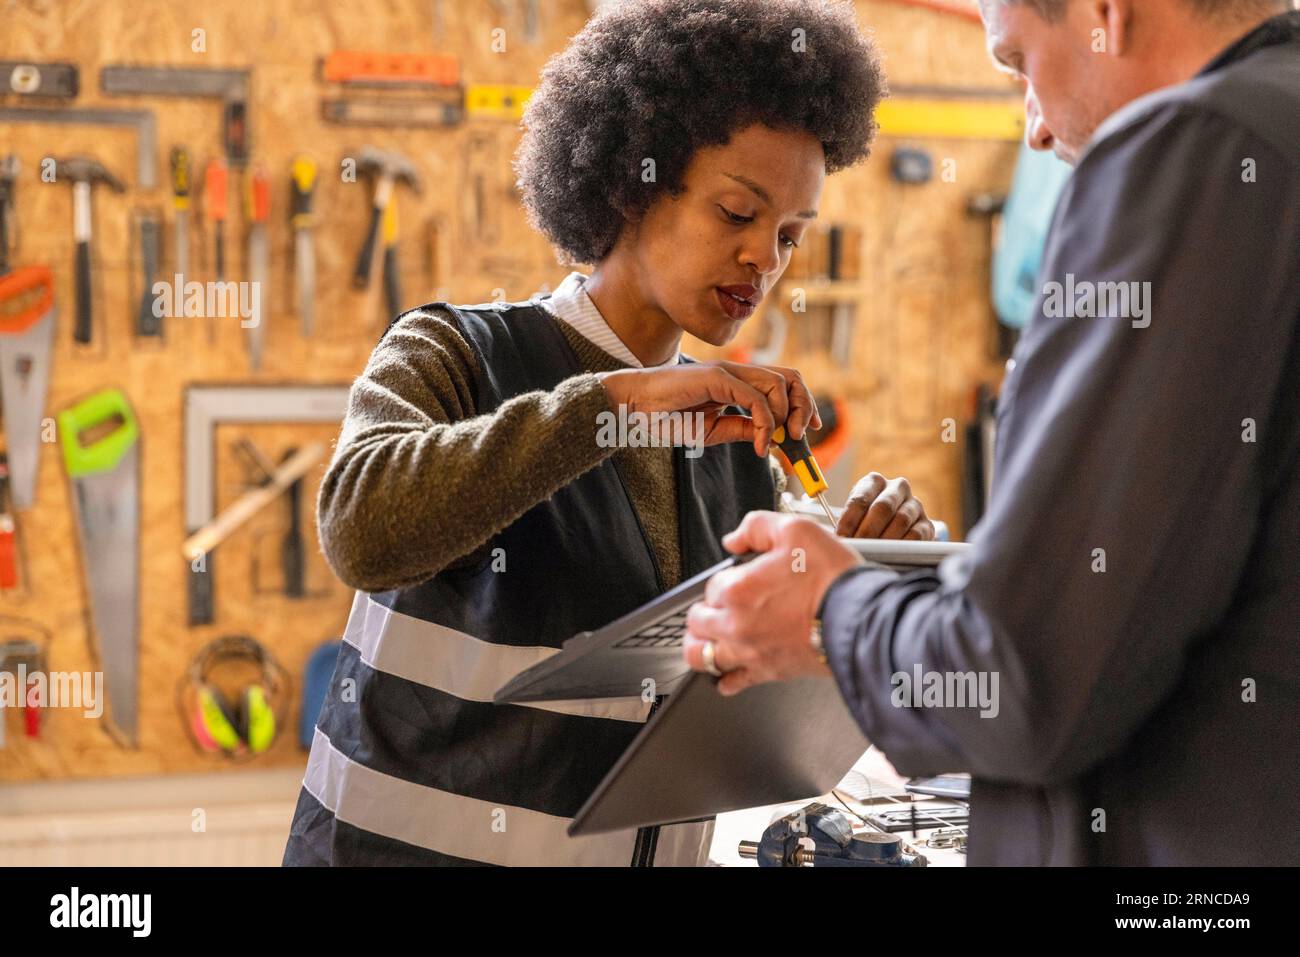 Focused female technician repairing laptop held by man at recycling center Stock Photo